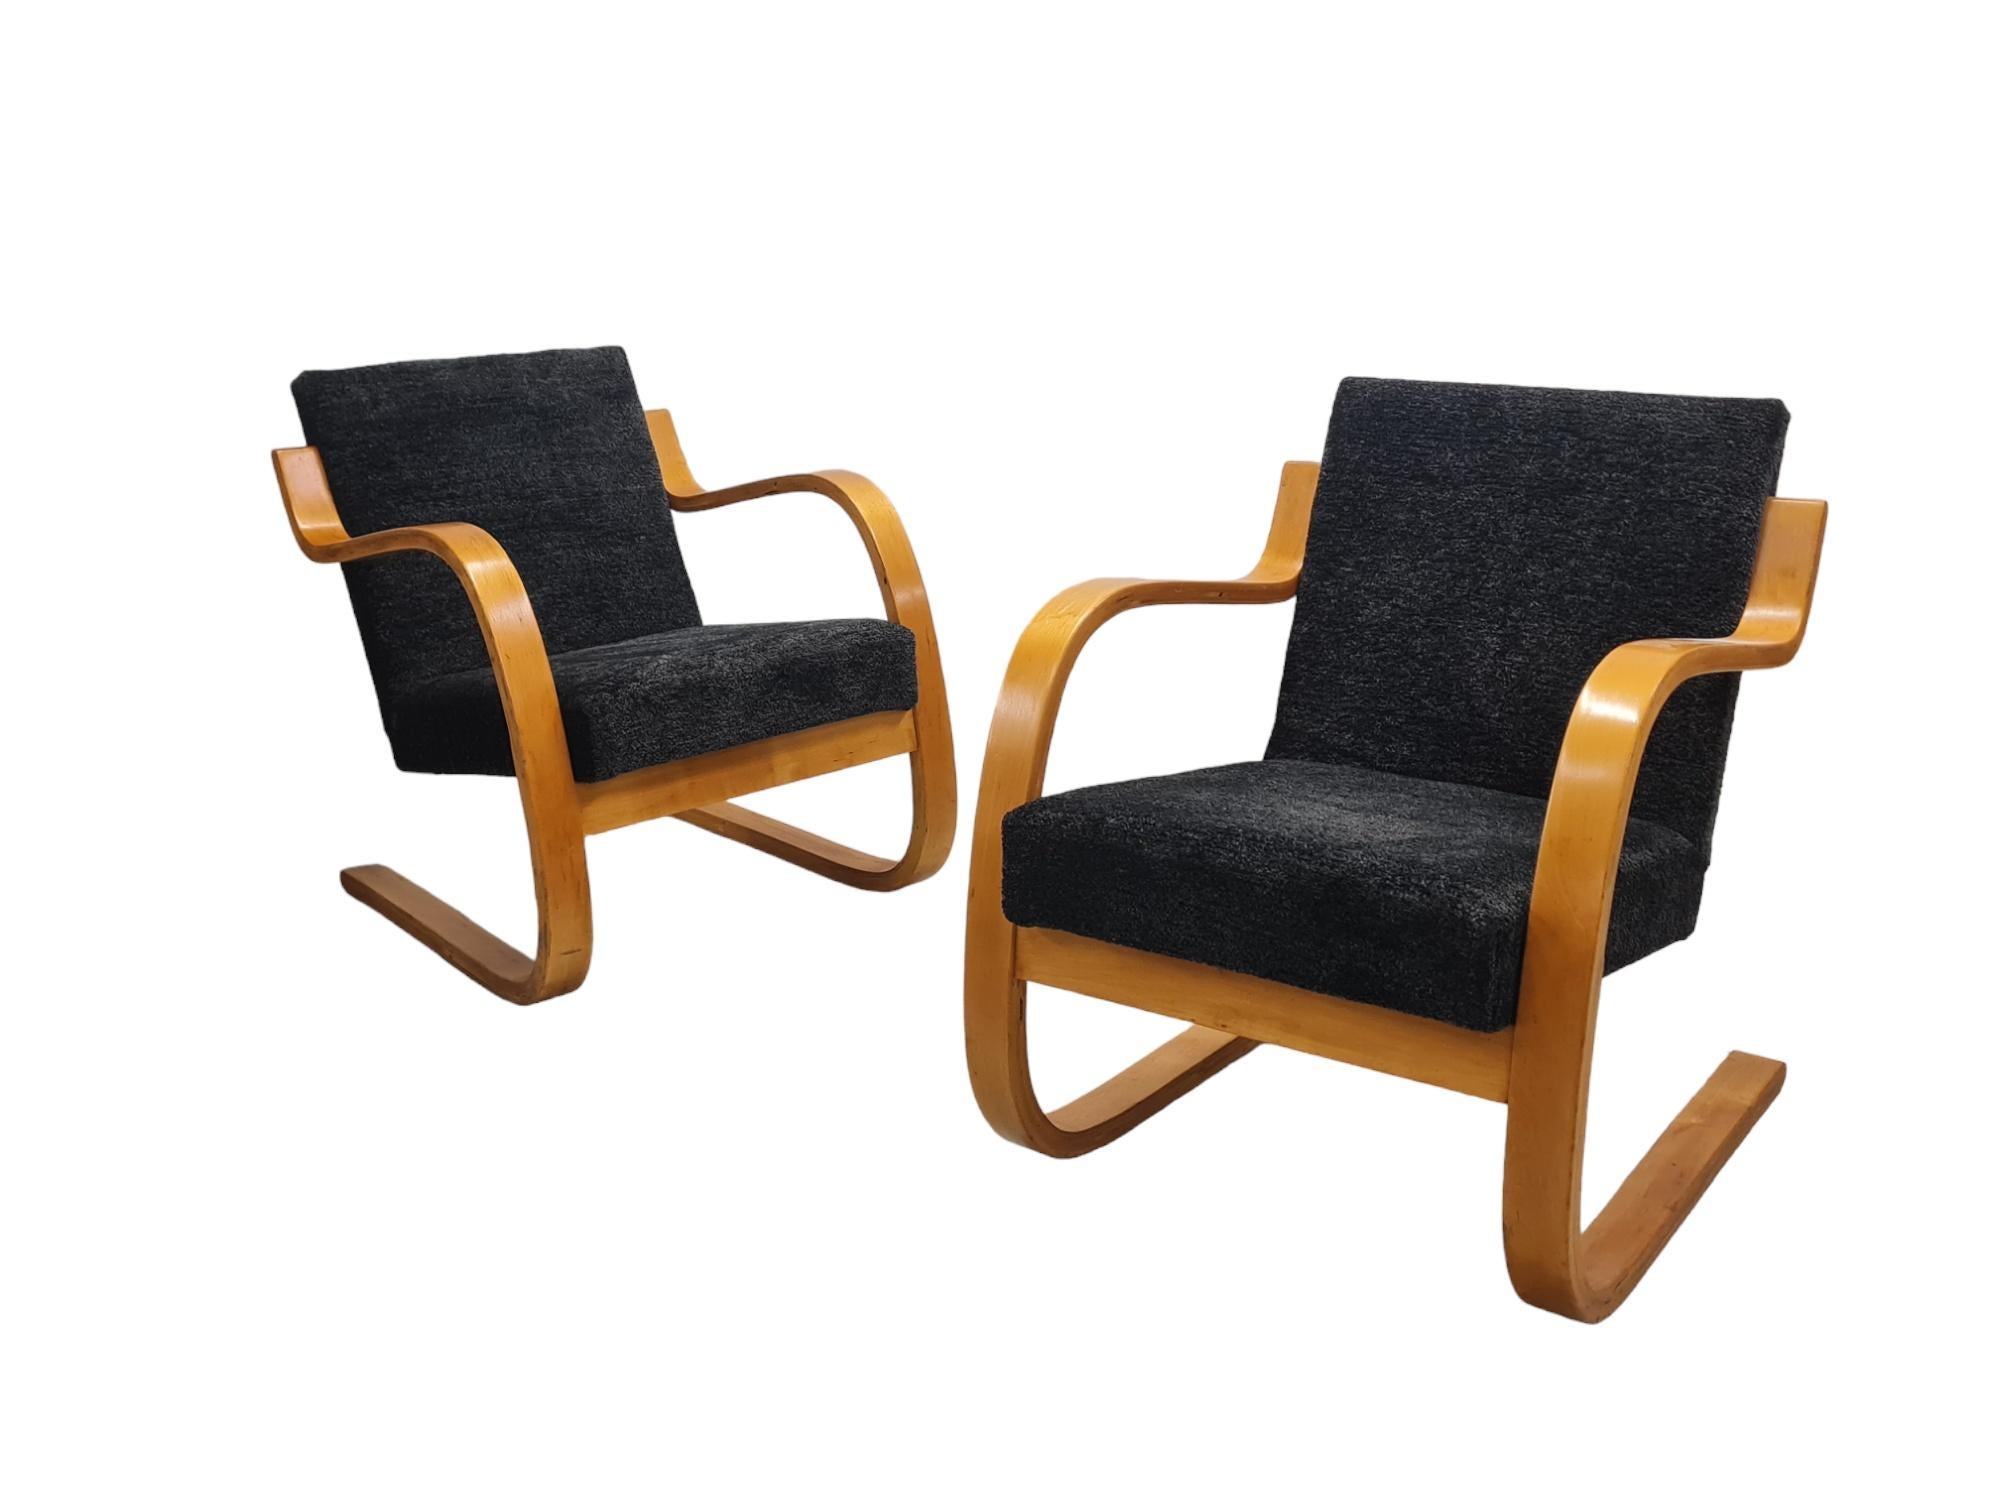 A beautiful pair of mid-century Alvar Aalto cantilever 'spring' chairs model 402, also known as Pikkupaimio (small paimio) associated with the legendary Paimio Sanatorium designed by Aalto. 

The chairs are lightweight and can be situated